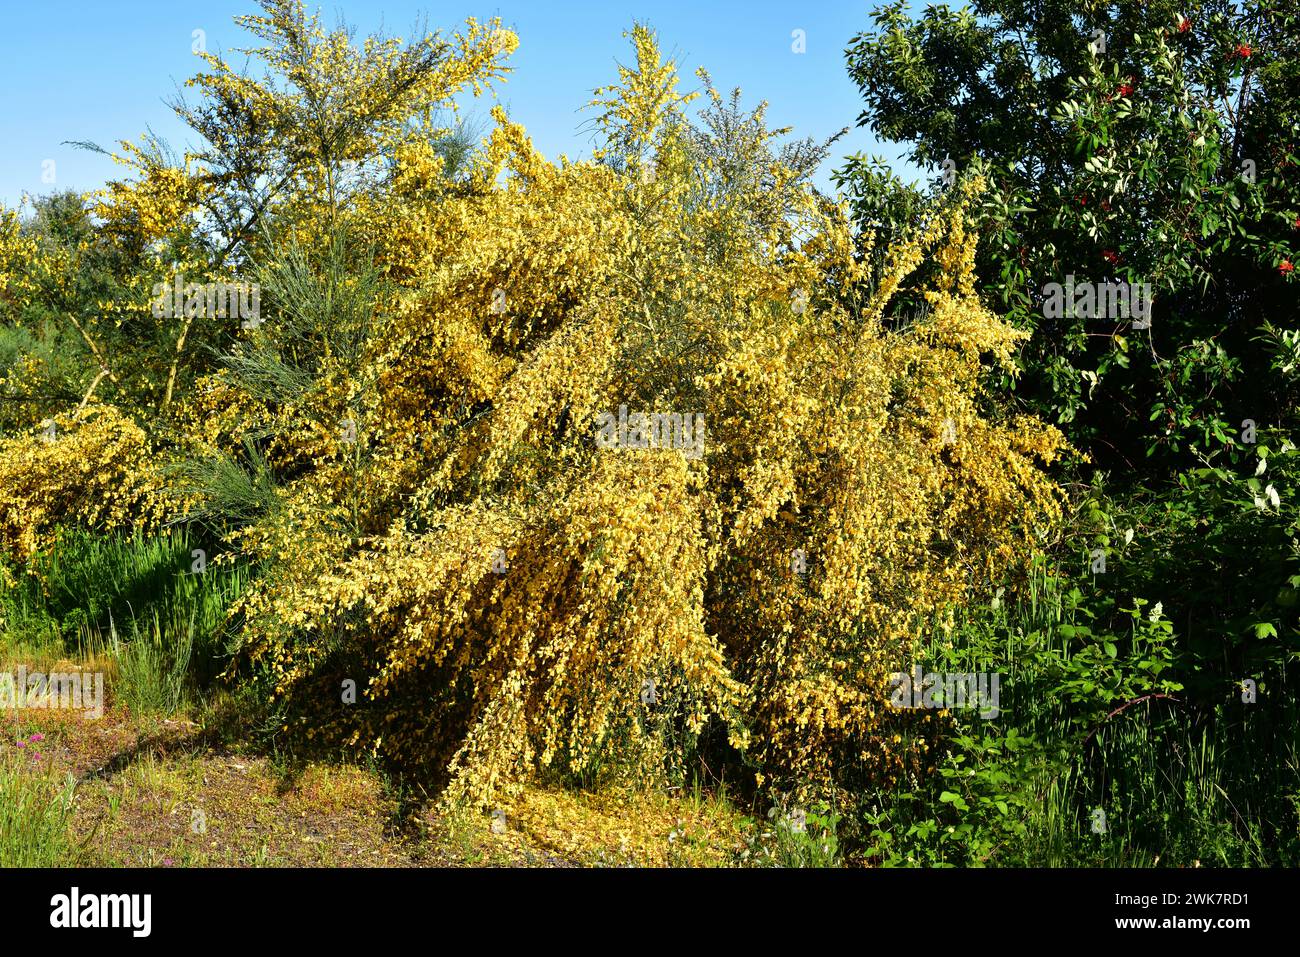 Retama or lluvia de oro (Genista monspessulana or Teline monspessulana) is a shrub native to Mediterranean Basin and naturalized in other temperate re Stock Photo